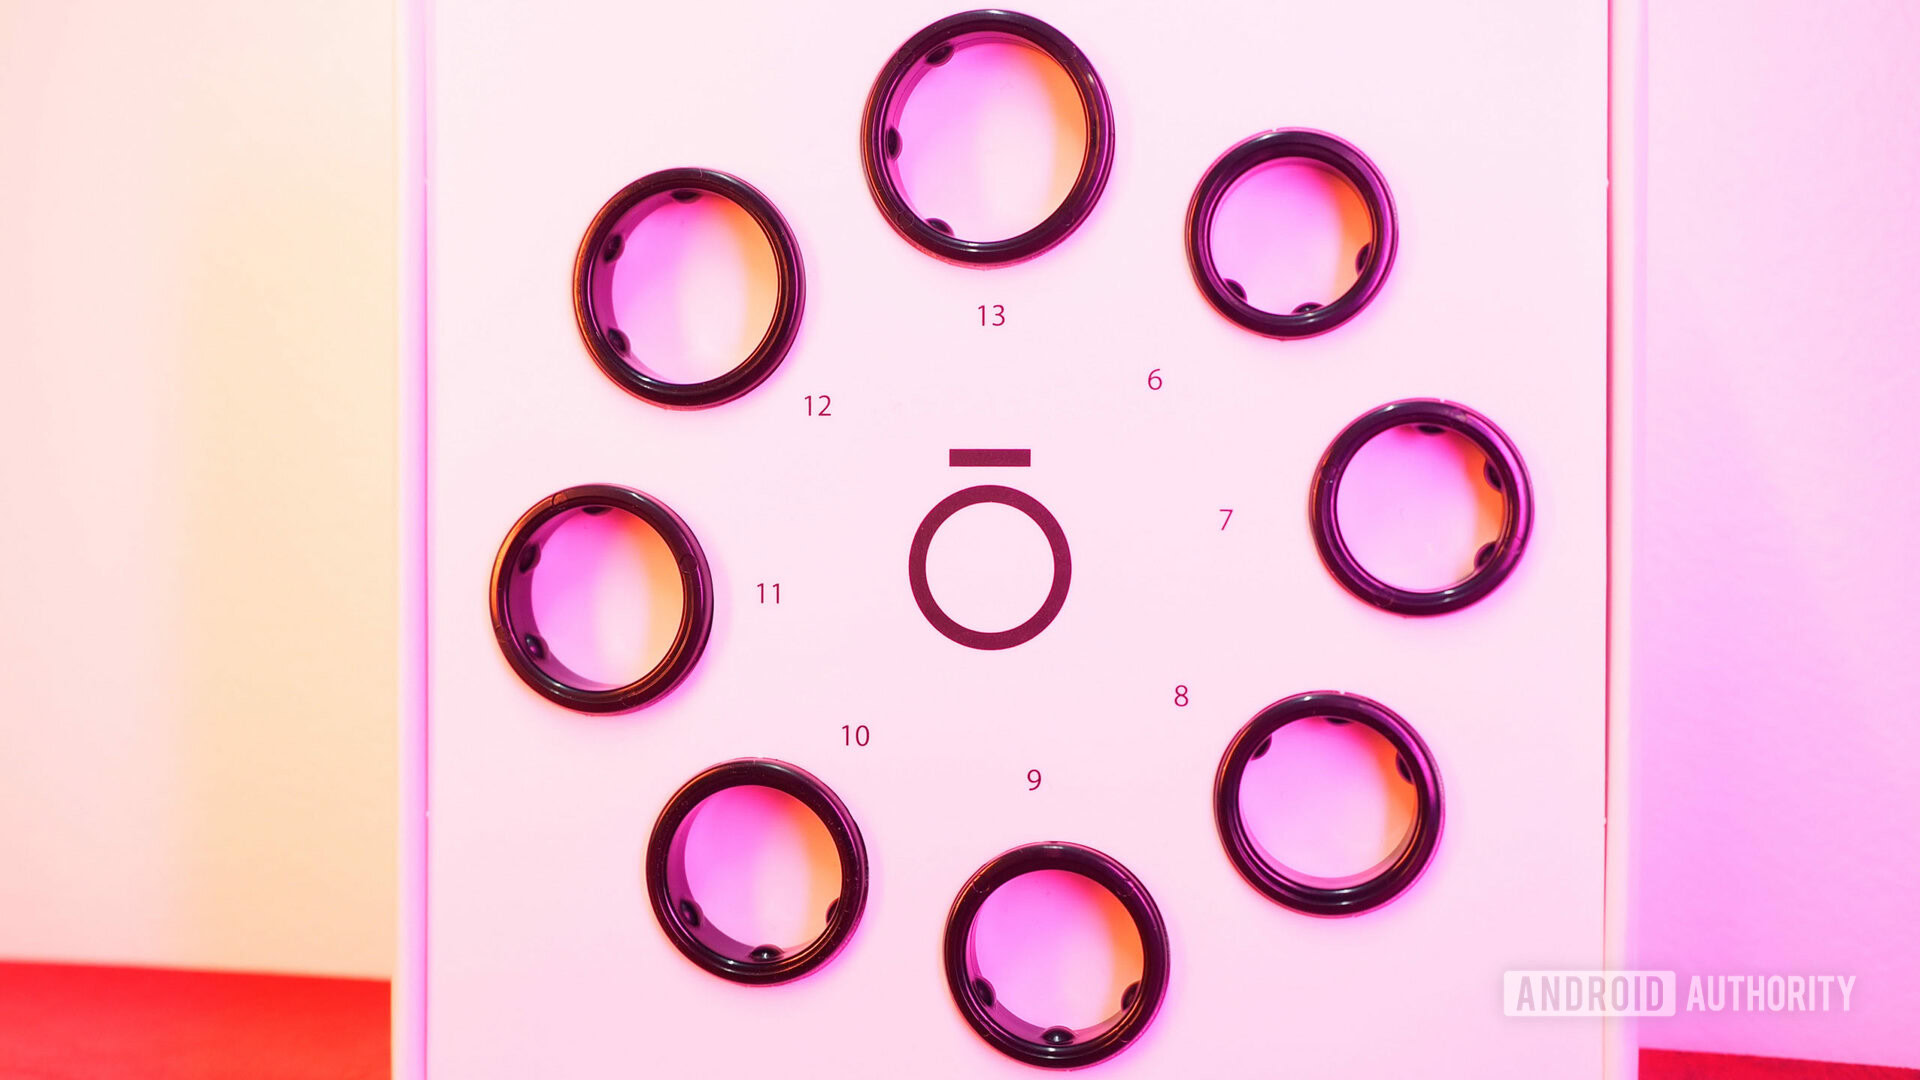 Learn How To Find Your Ring Size With Our Ring Size Chart